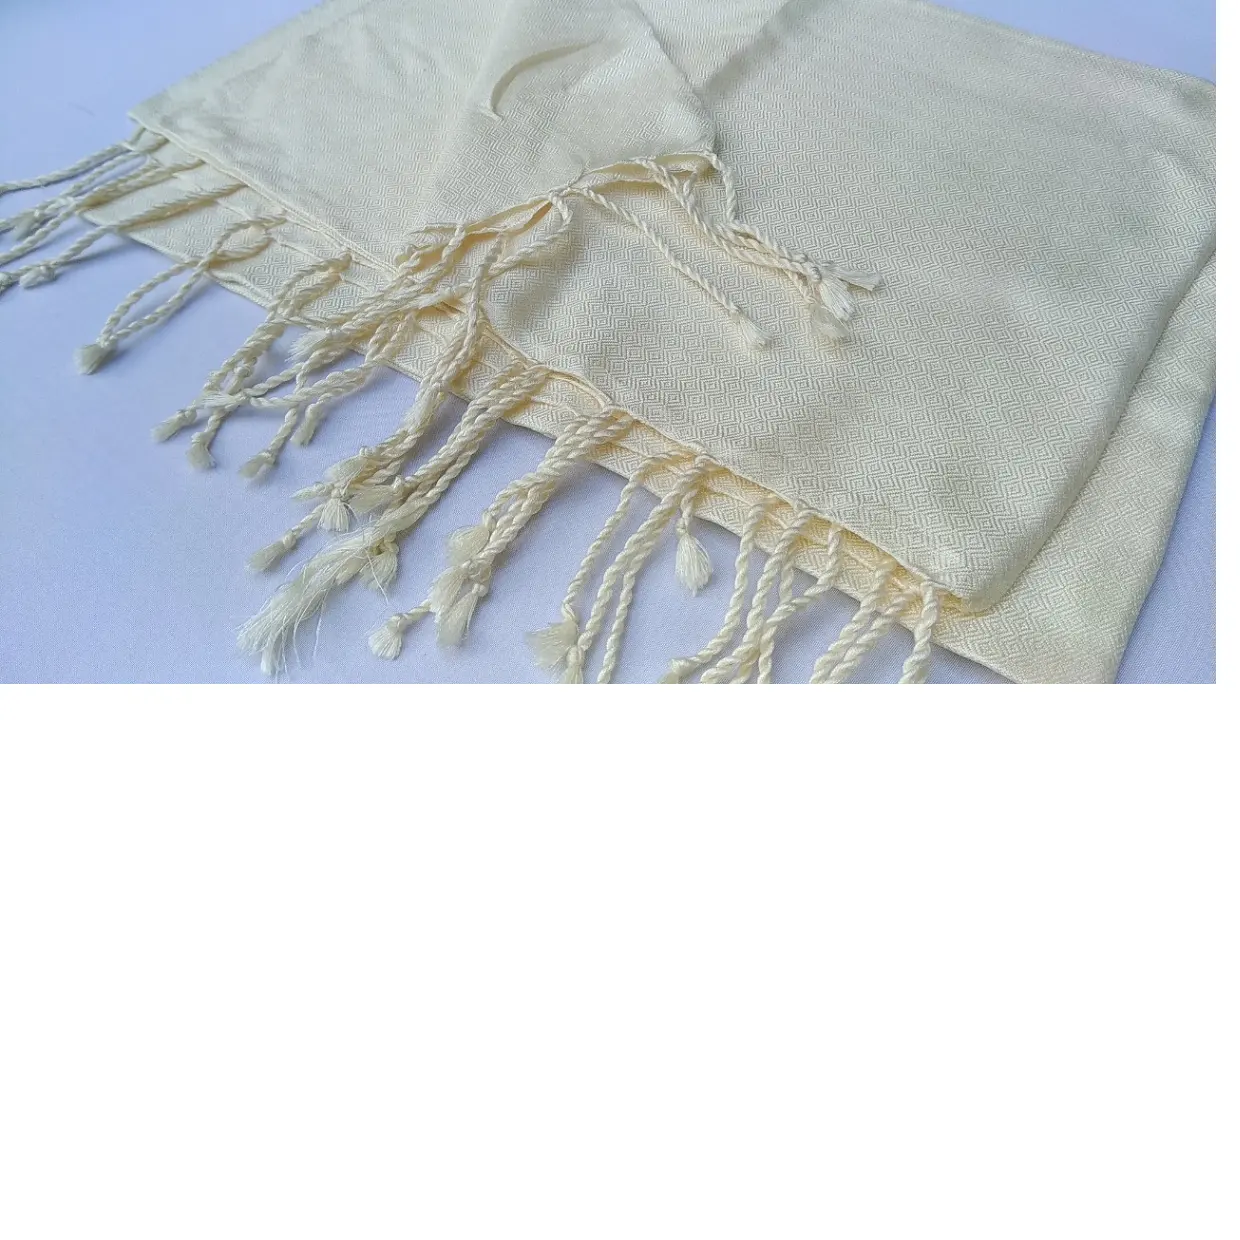 blank silk scarves in assorted sizes suitable for dyers and artists